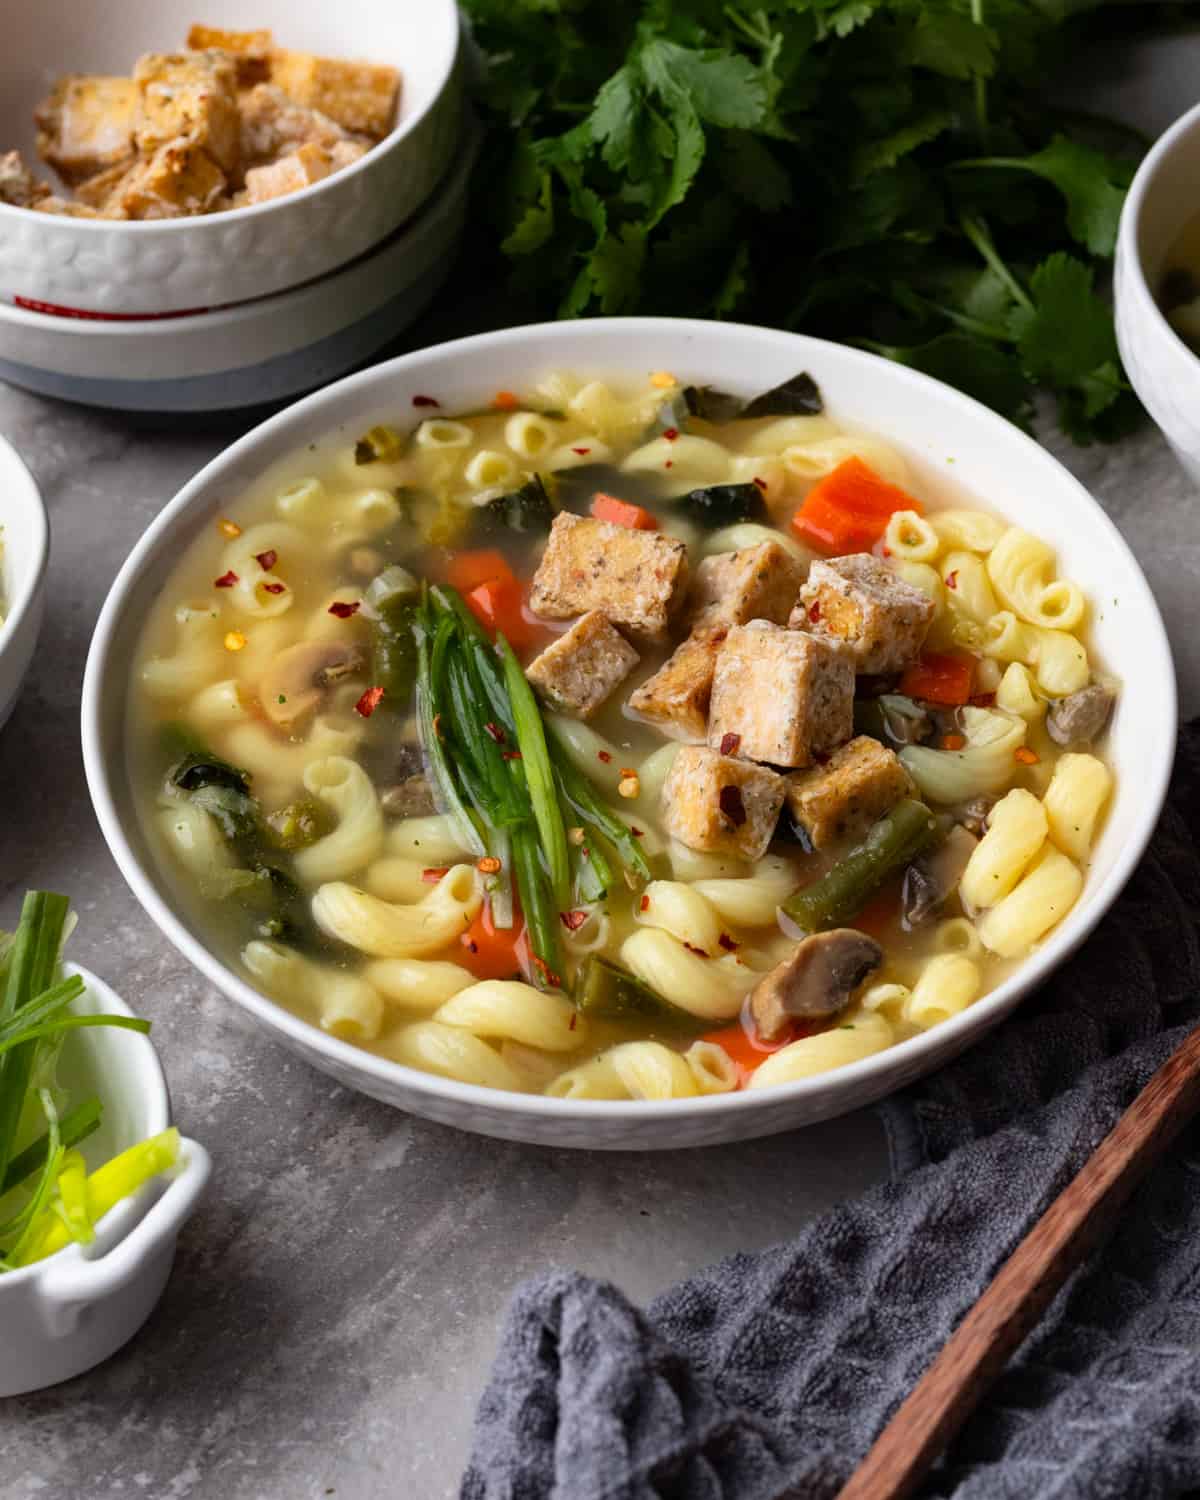 Cozy image of a bowl of vegan noodle soup made with a vegetable broth with gluten free noddles, tofu, chickpeas, carrots and mushrooms. The smaller bowls have green onions and another soup bowl.